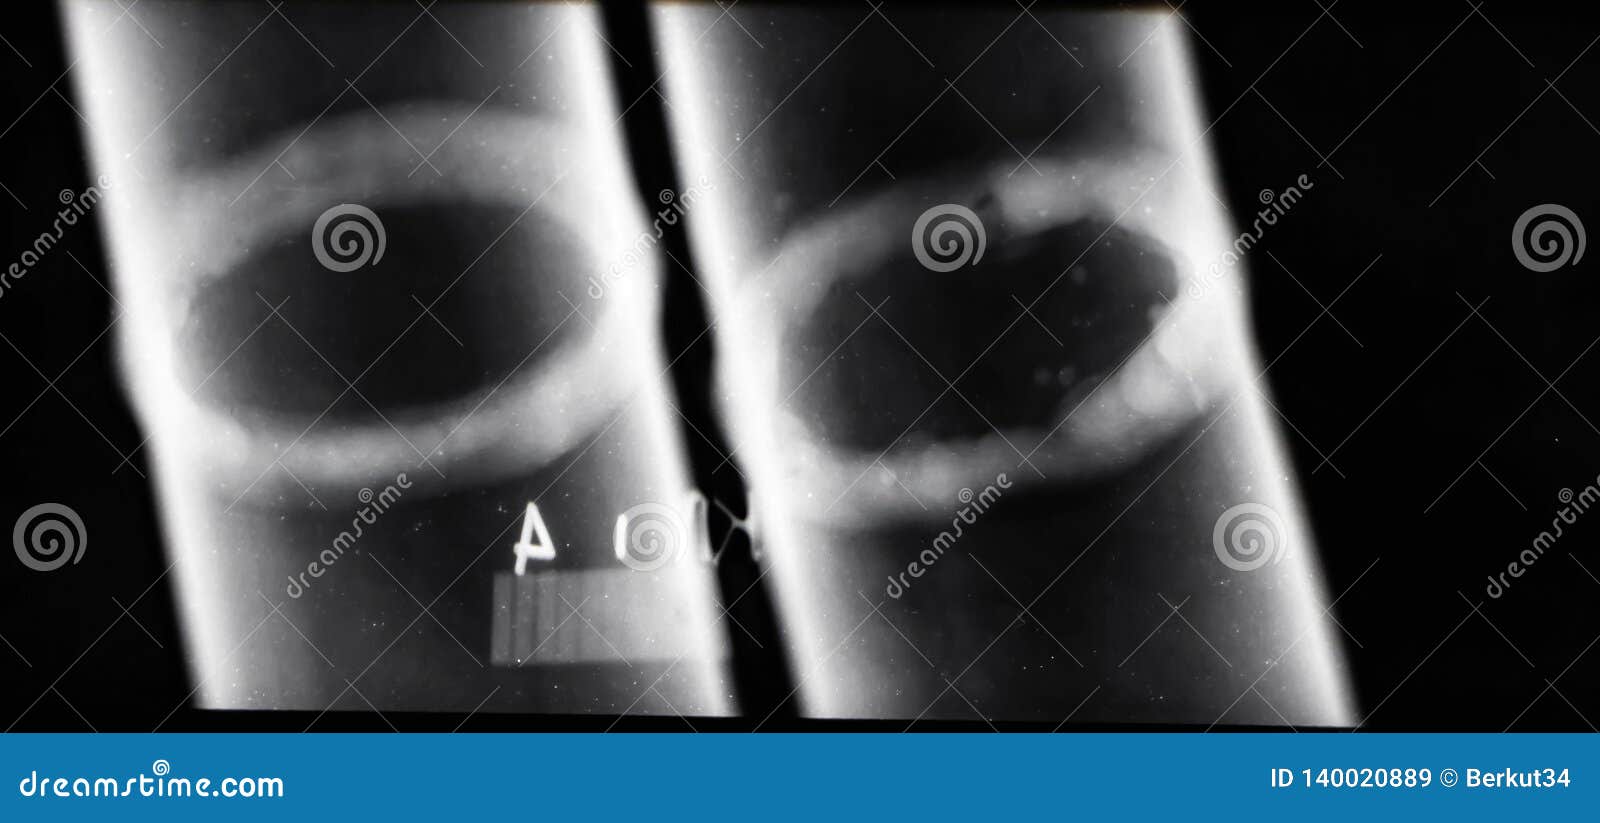 x-ray images of welds of pipelines to identify defective areas